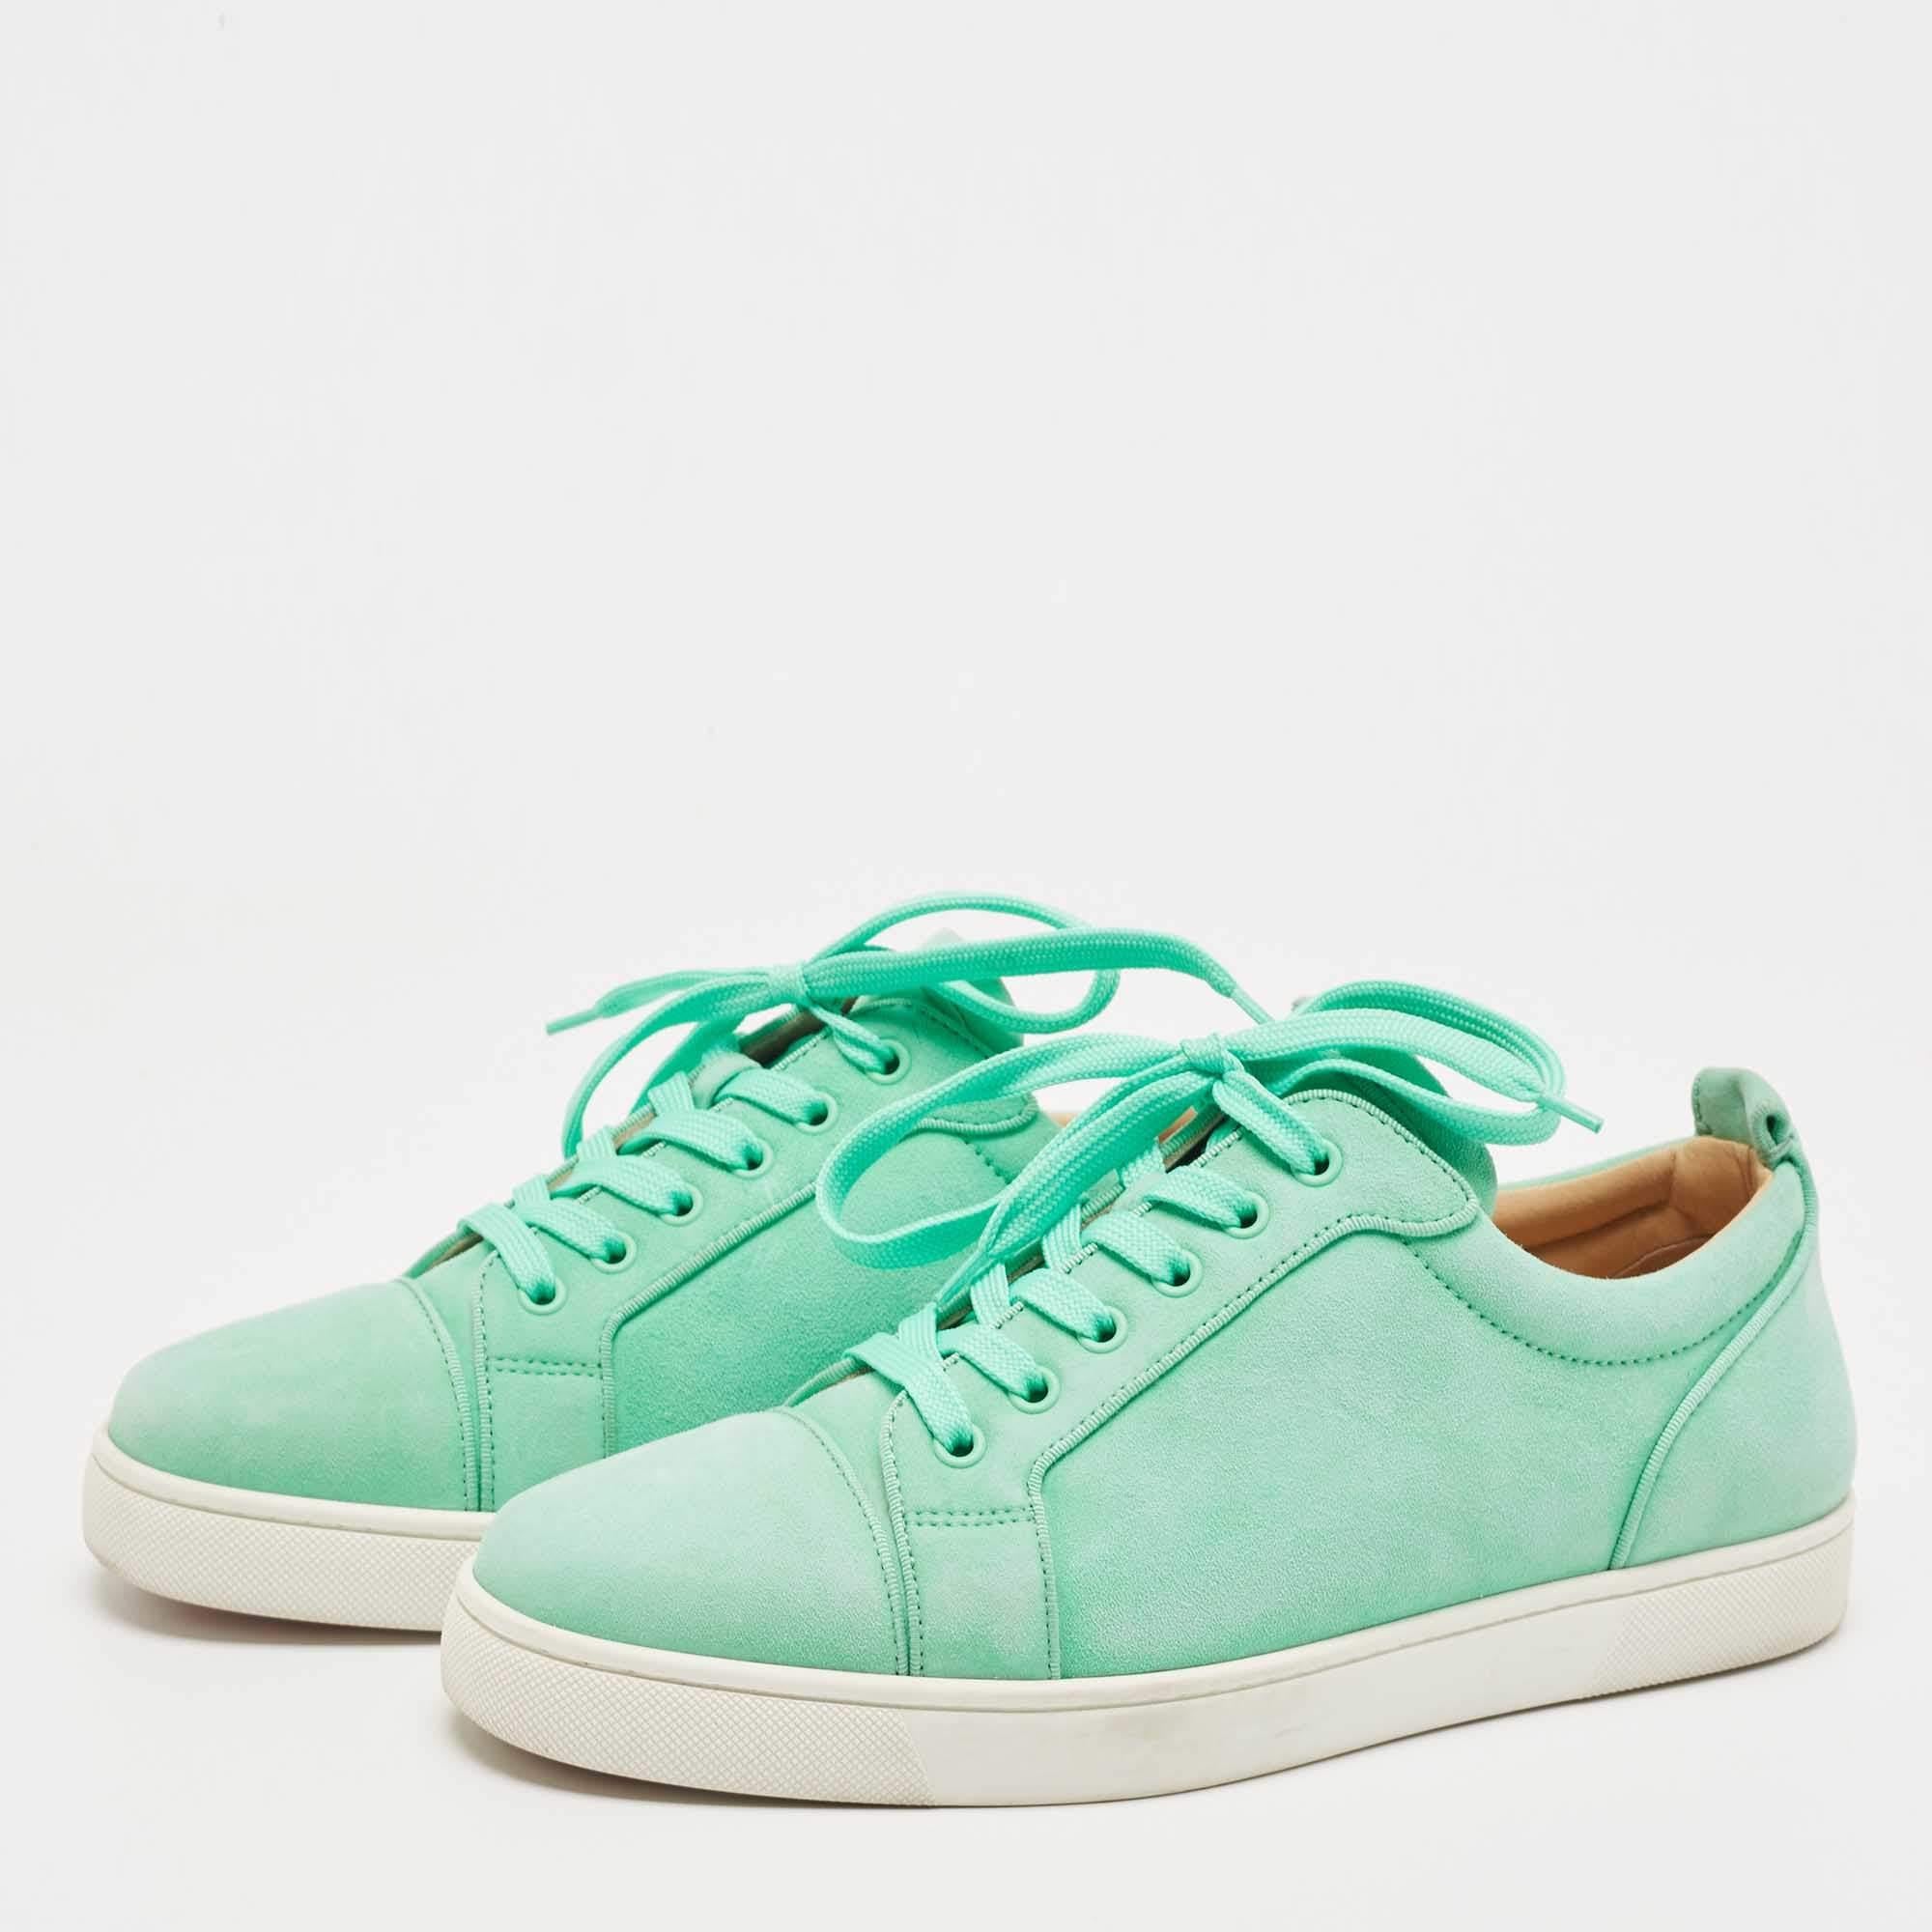 Men's Christian Louboutin green Suede Rantulow Low Top Sneakers For Sale